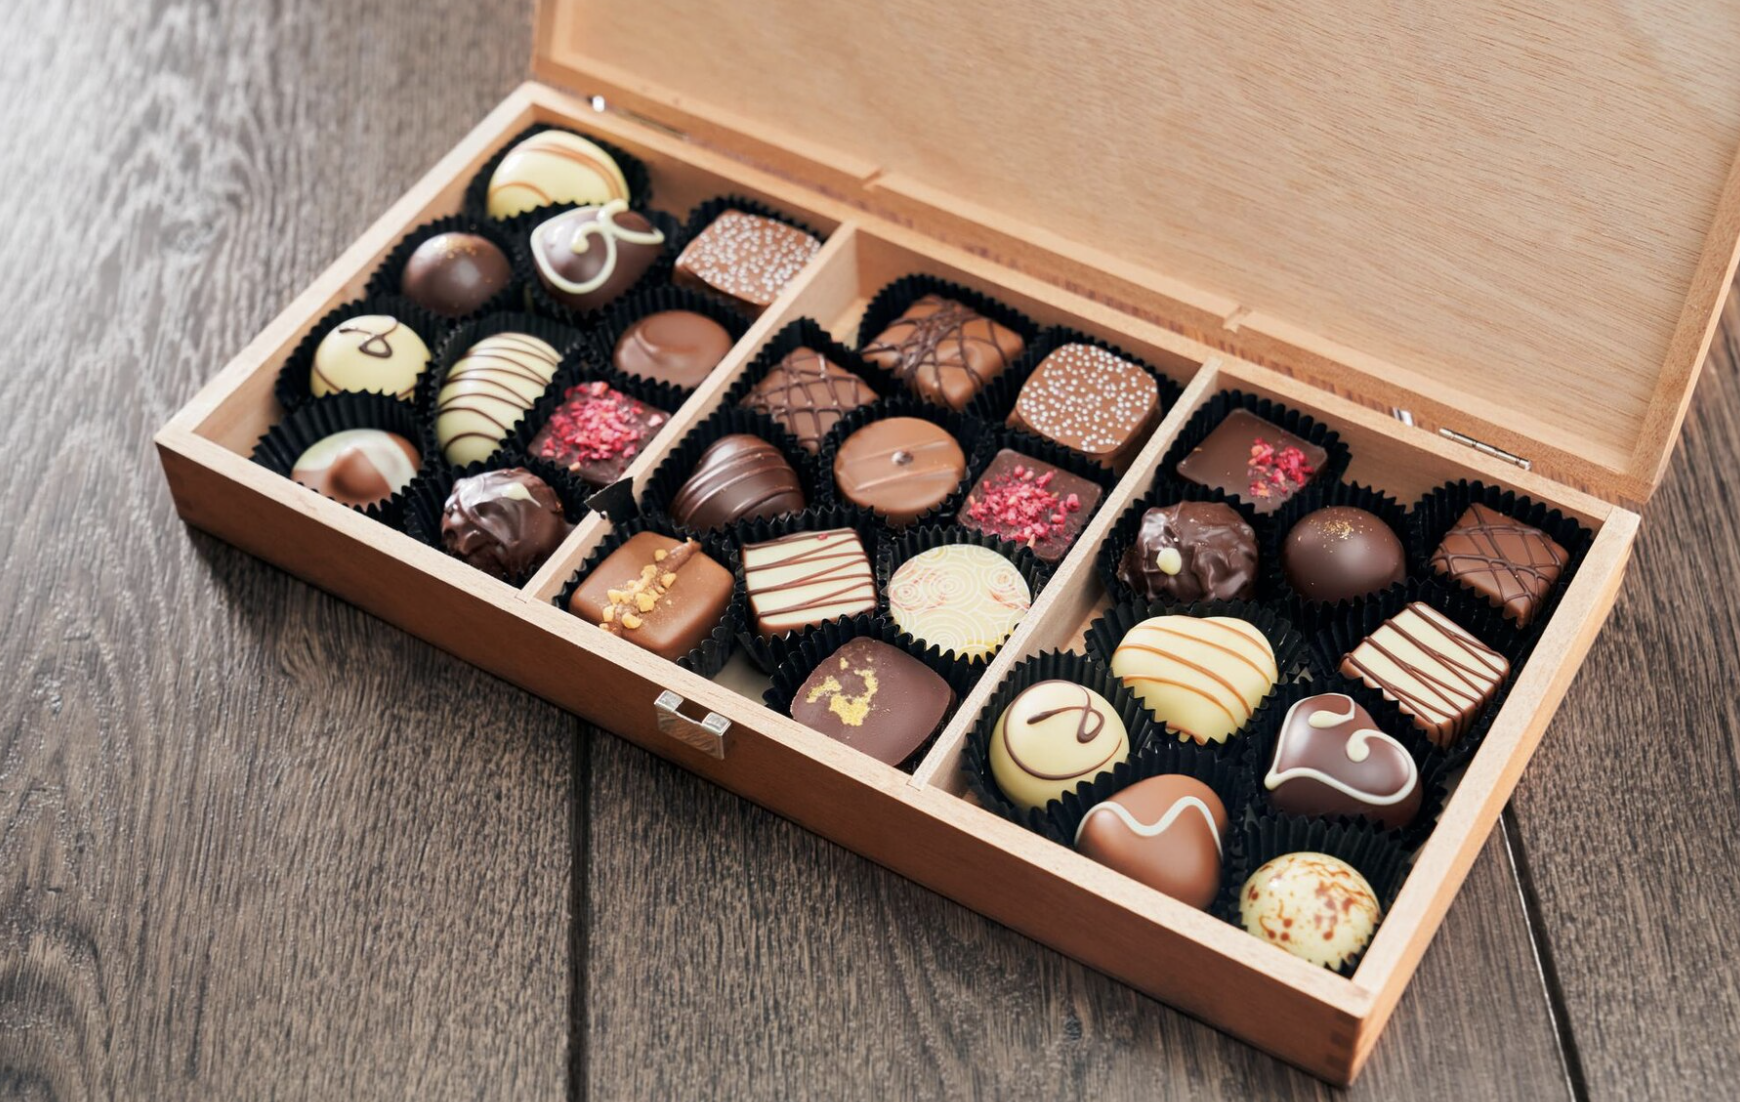 8 Best Chocolate Boxes to Buy for Valentine's Day